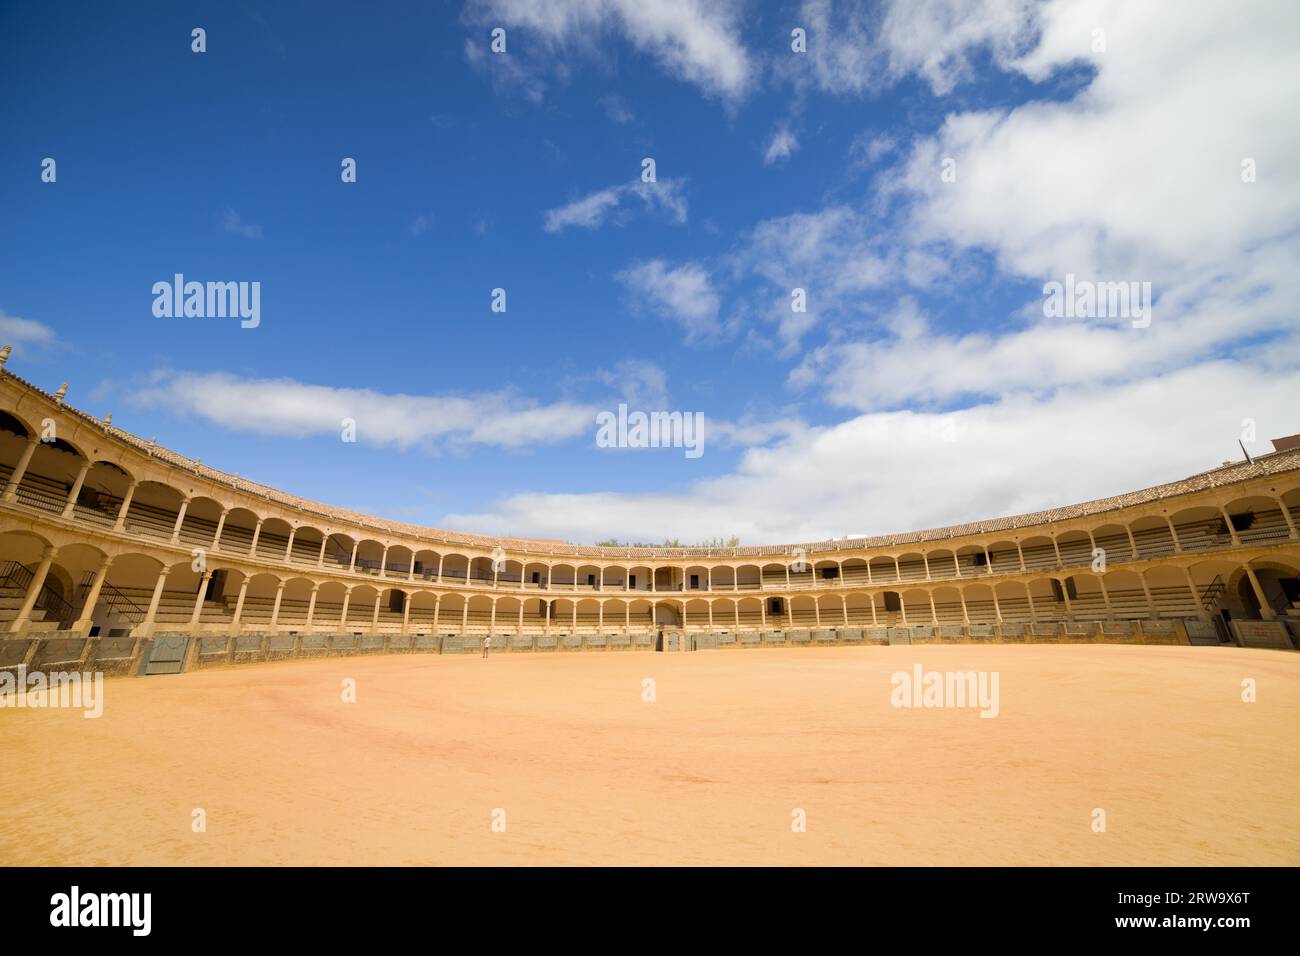 Bullring in Ronda, opened in 1785, one of the oldest and most famous bullfighting arena in Spain Stock Photo